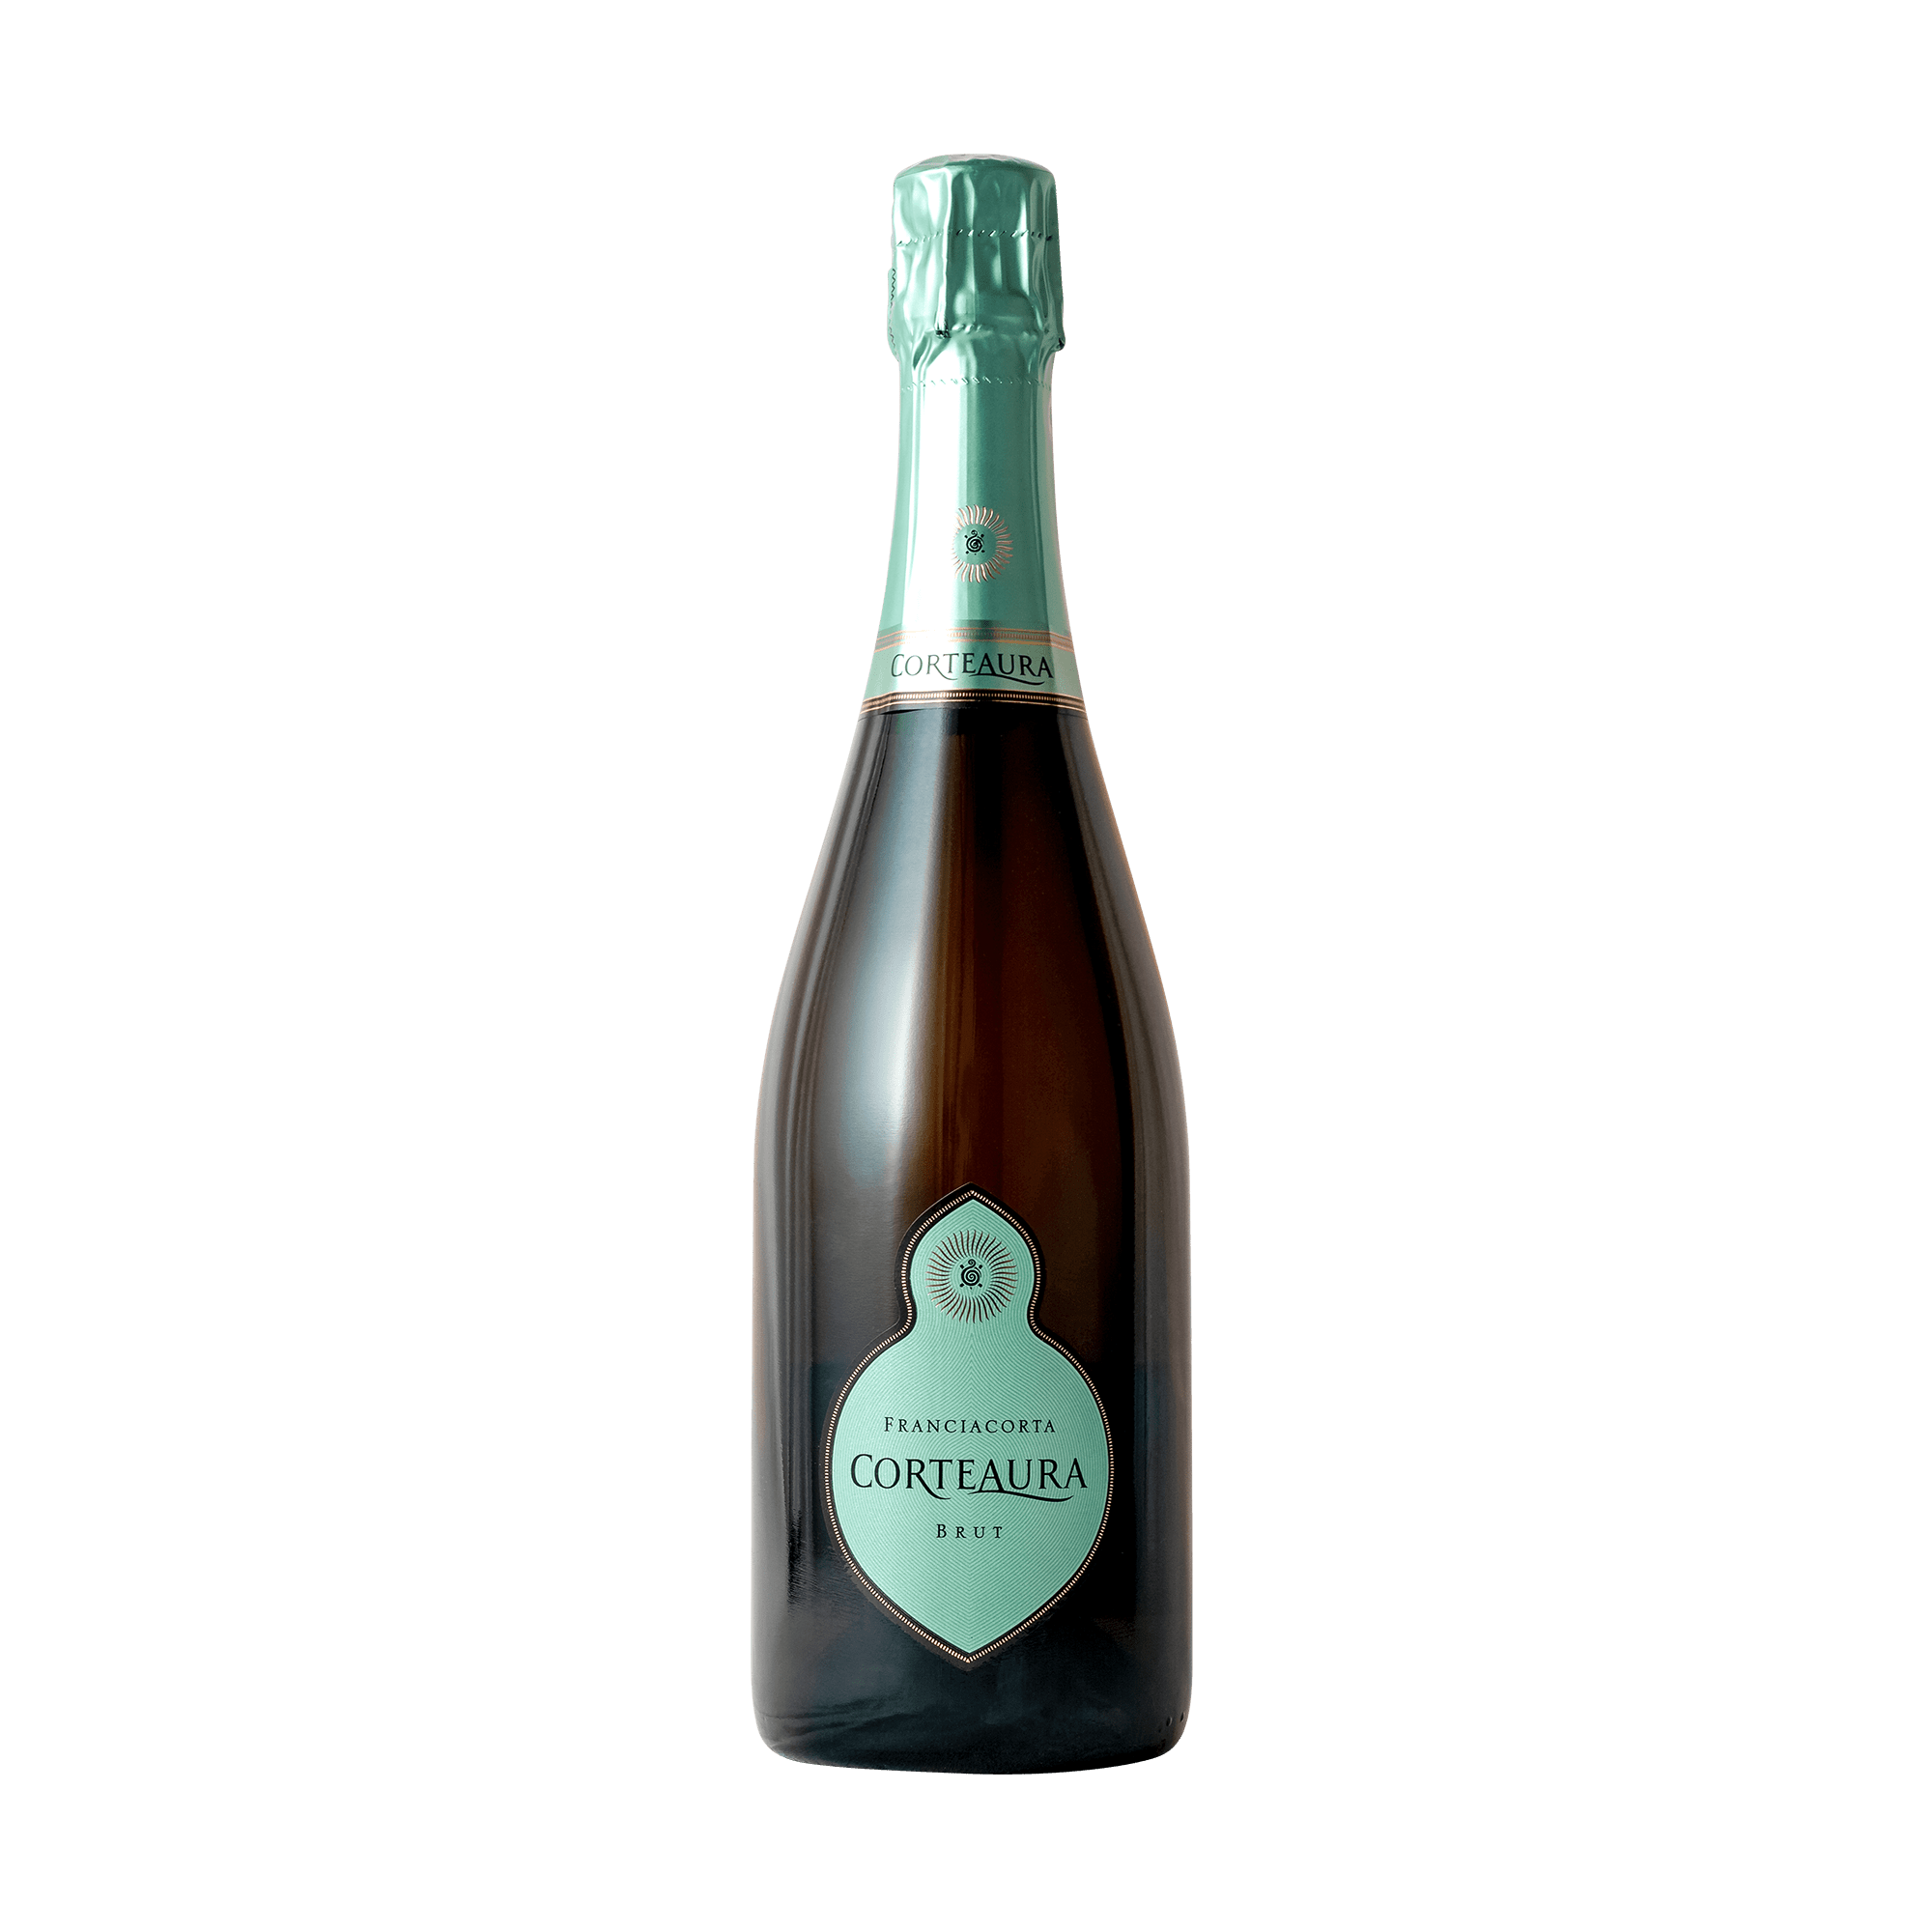 Franciacorta Corteaura Brut - ISN: Italian Speciality for the Netherlands